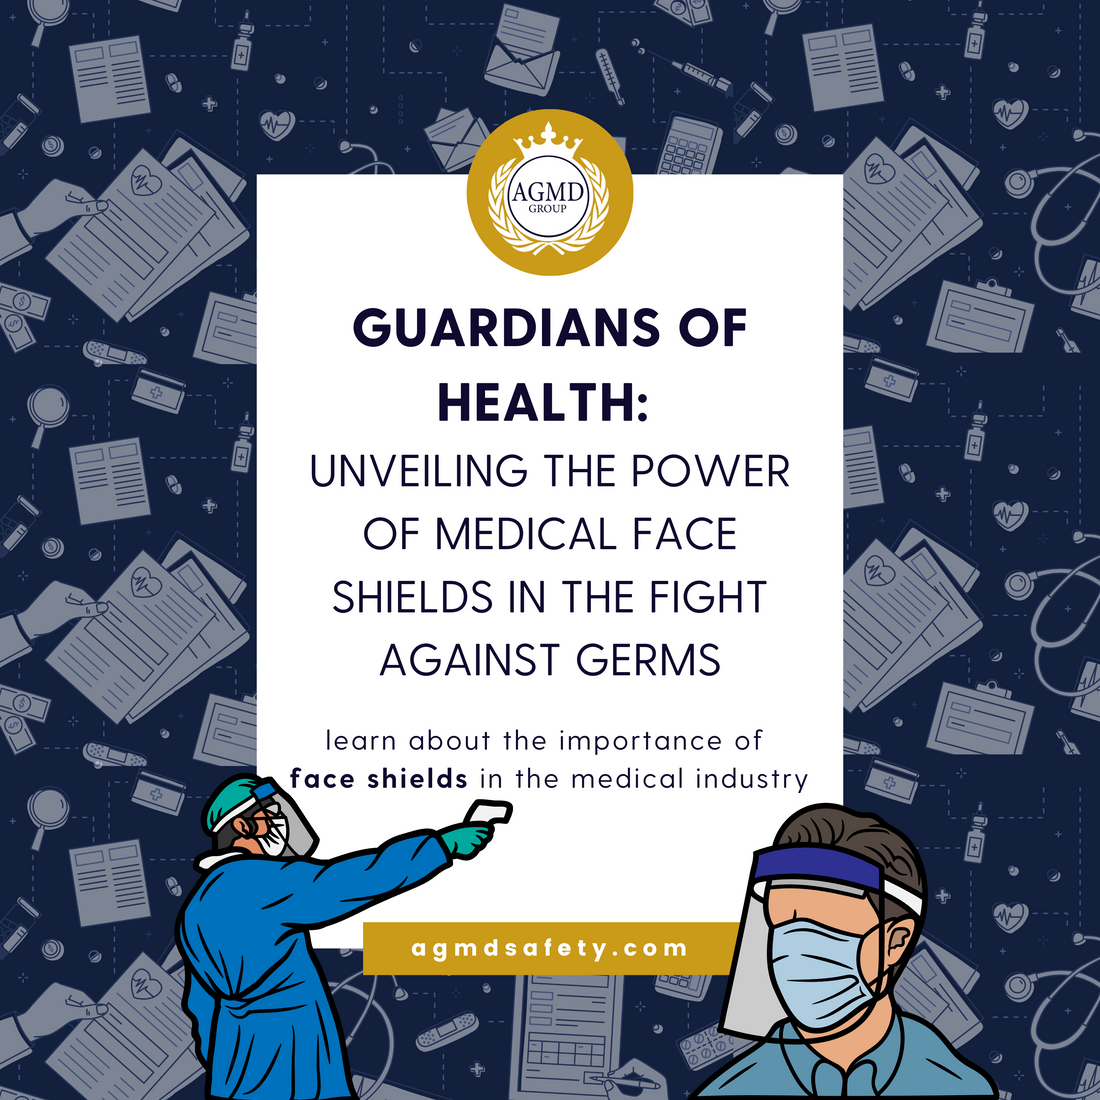 Guardians of Health: Unveiling the Power of Medical Face Shields in the Fight Against Germs